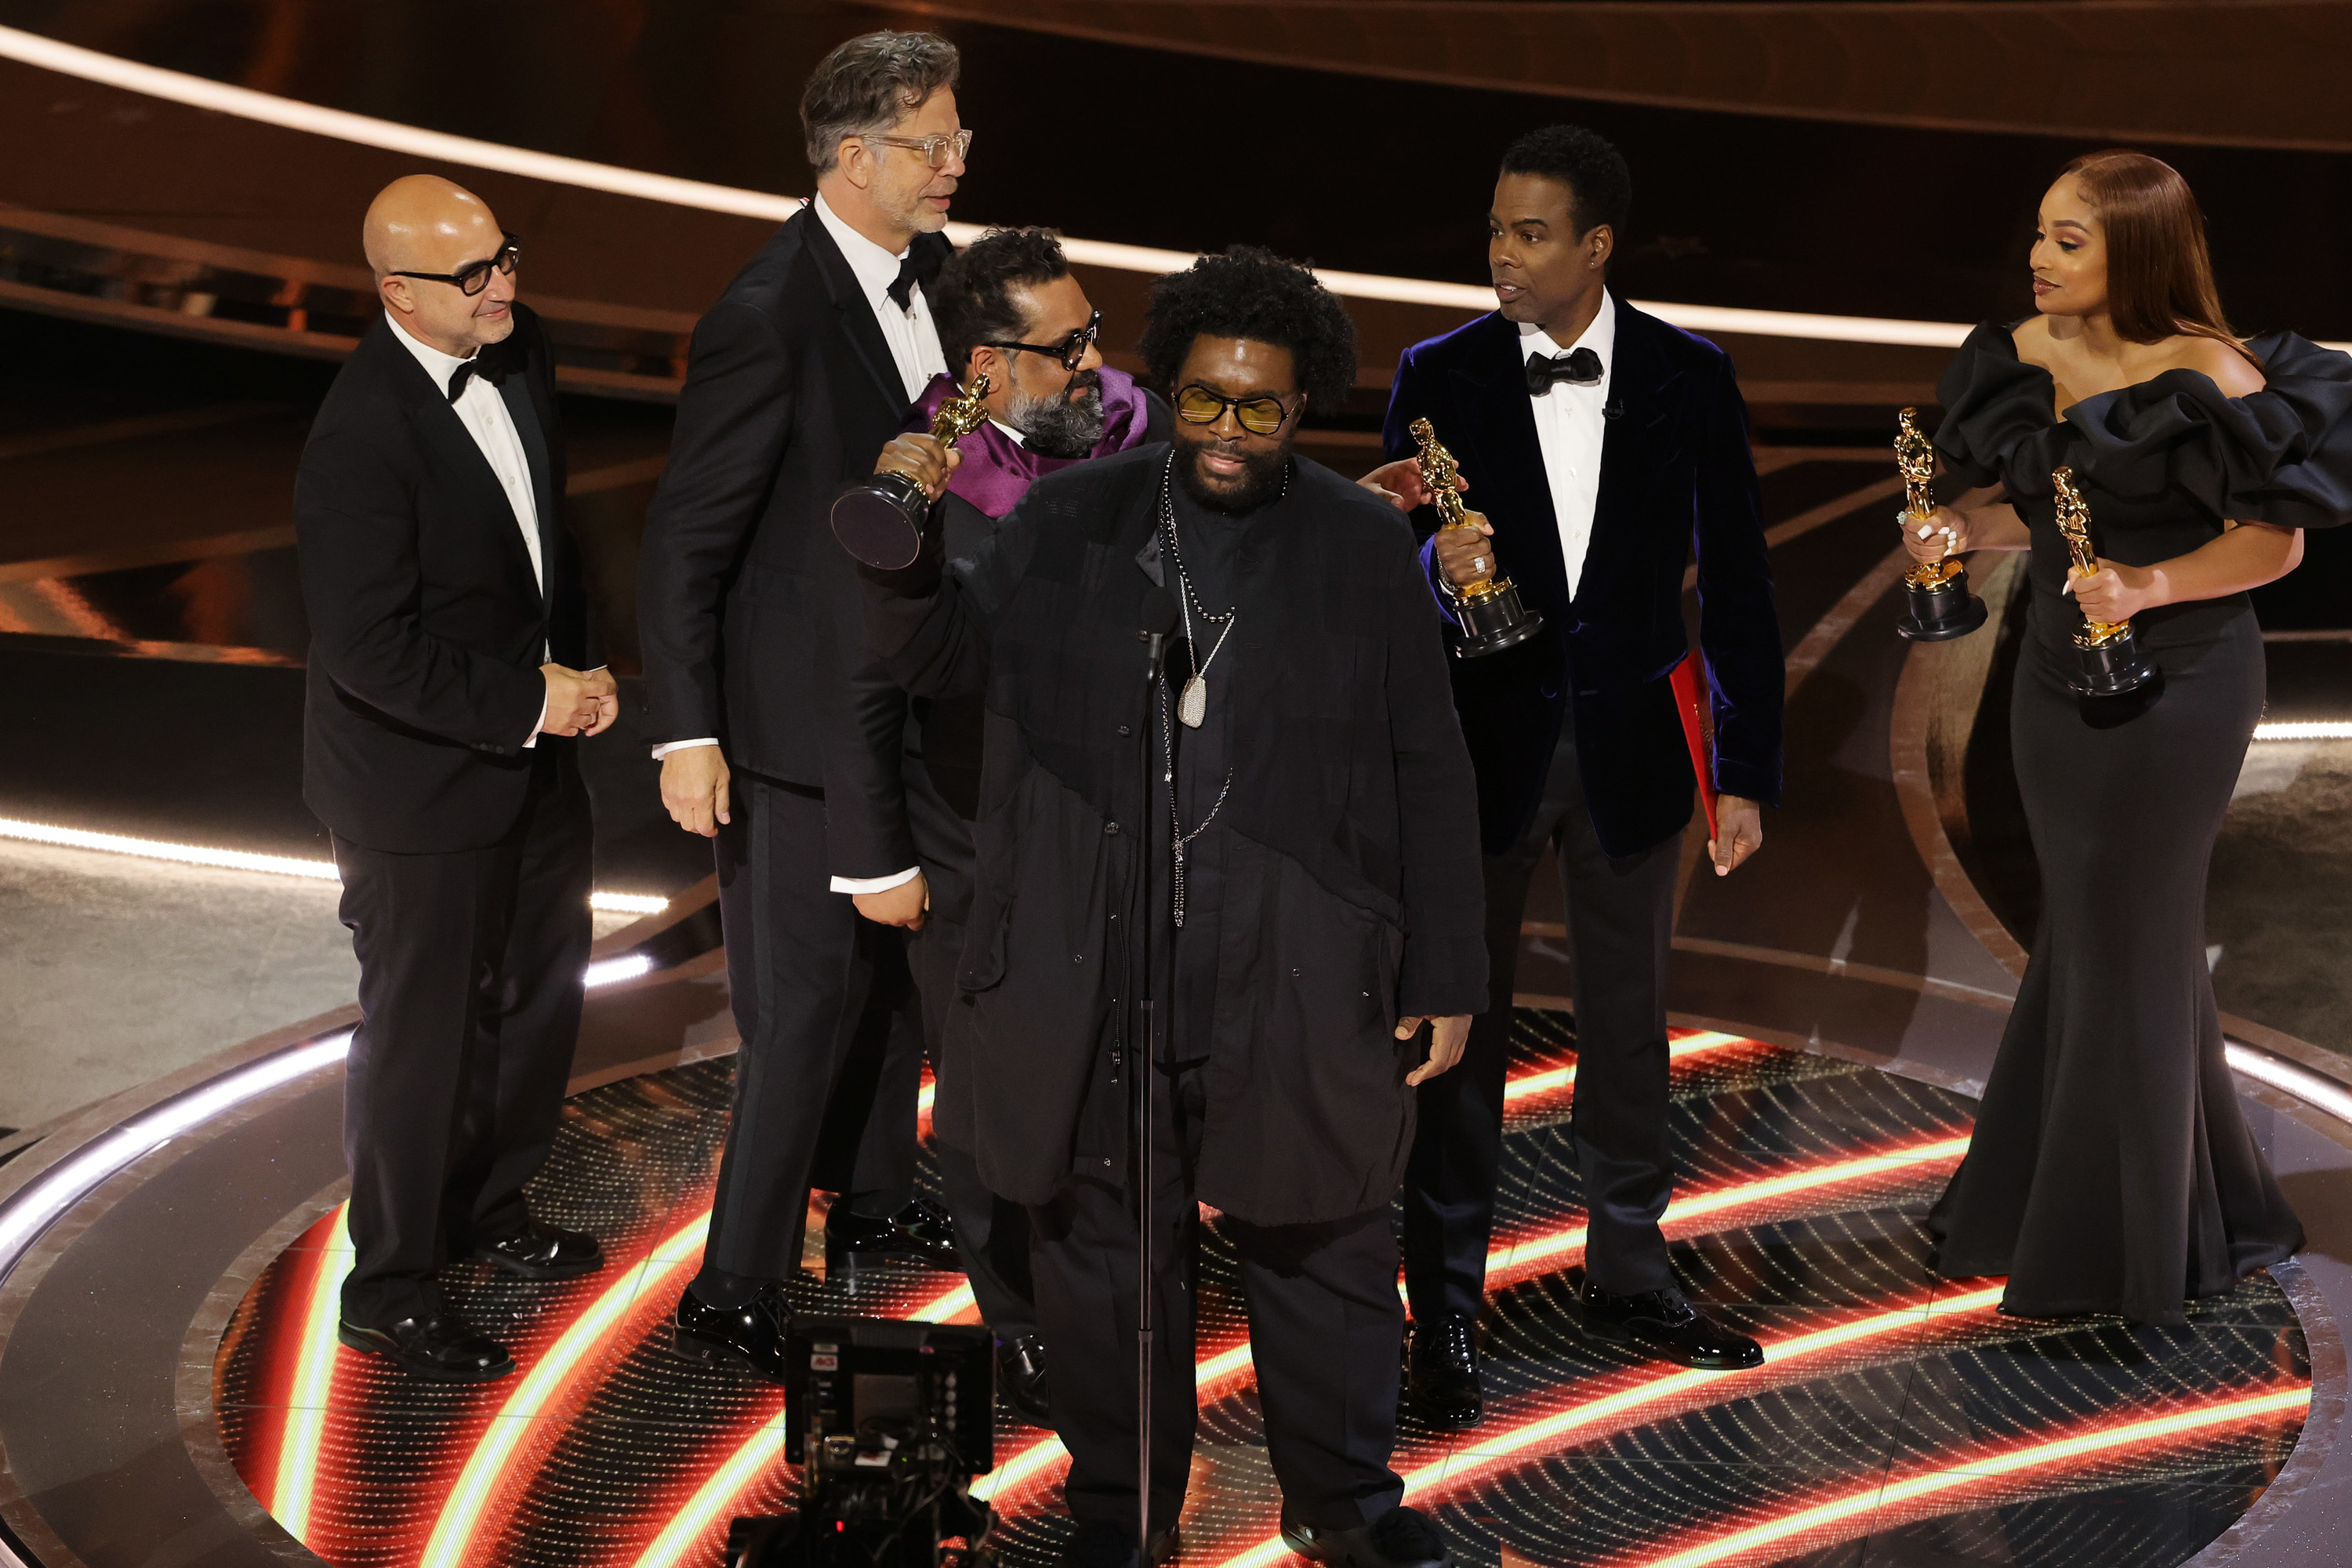 Questlove accepting his Oscar with Chris and others behind him